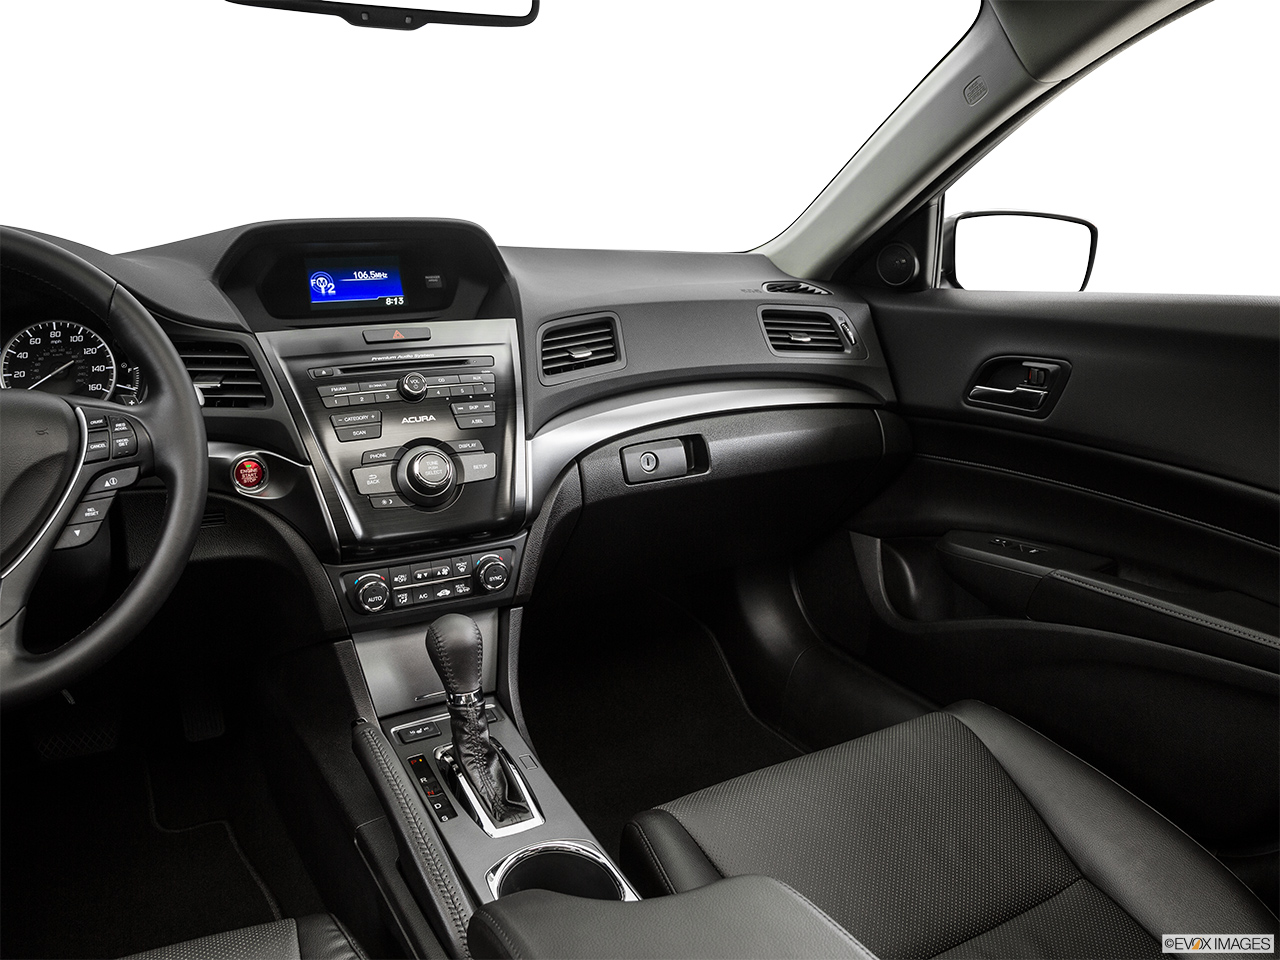 2015 Acura ILX 5-Speed Automatic Center Console/Passenger Side. 